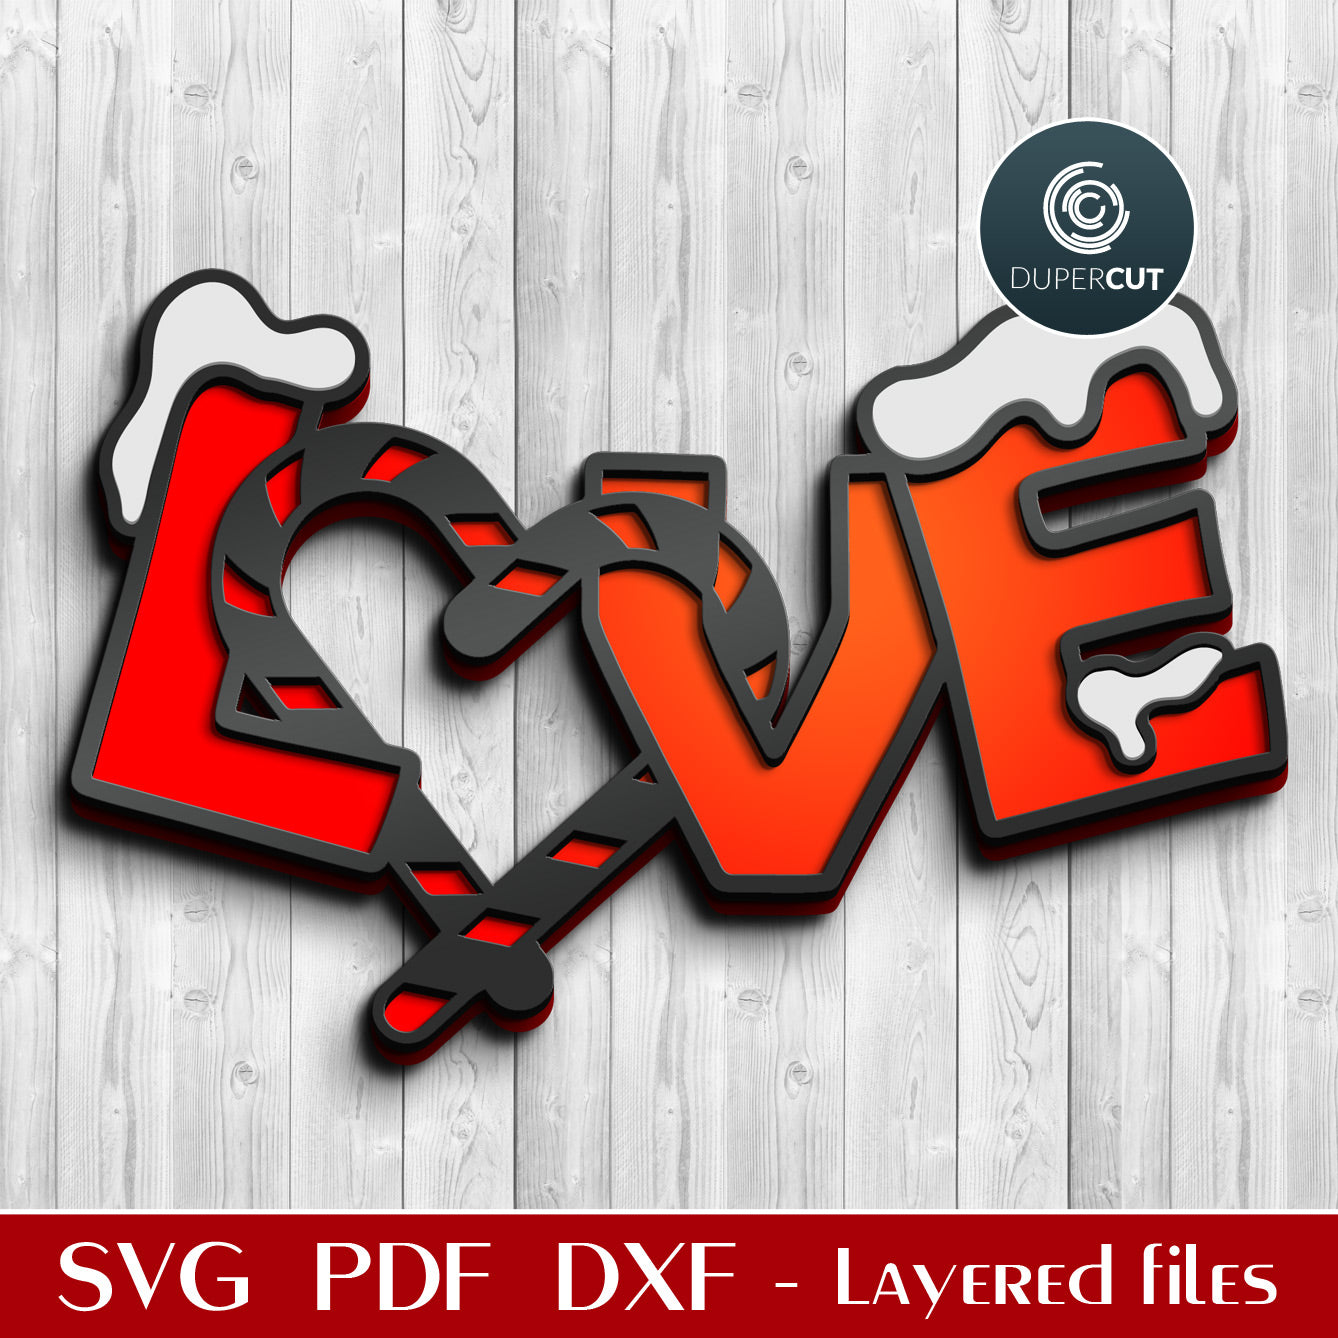 Love with candy cane Christmas decoration template - SVG DXF layered cutting files for Glowforge, Cricut, Silhouette Cameo, scroll saw design by DuperCut